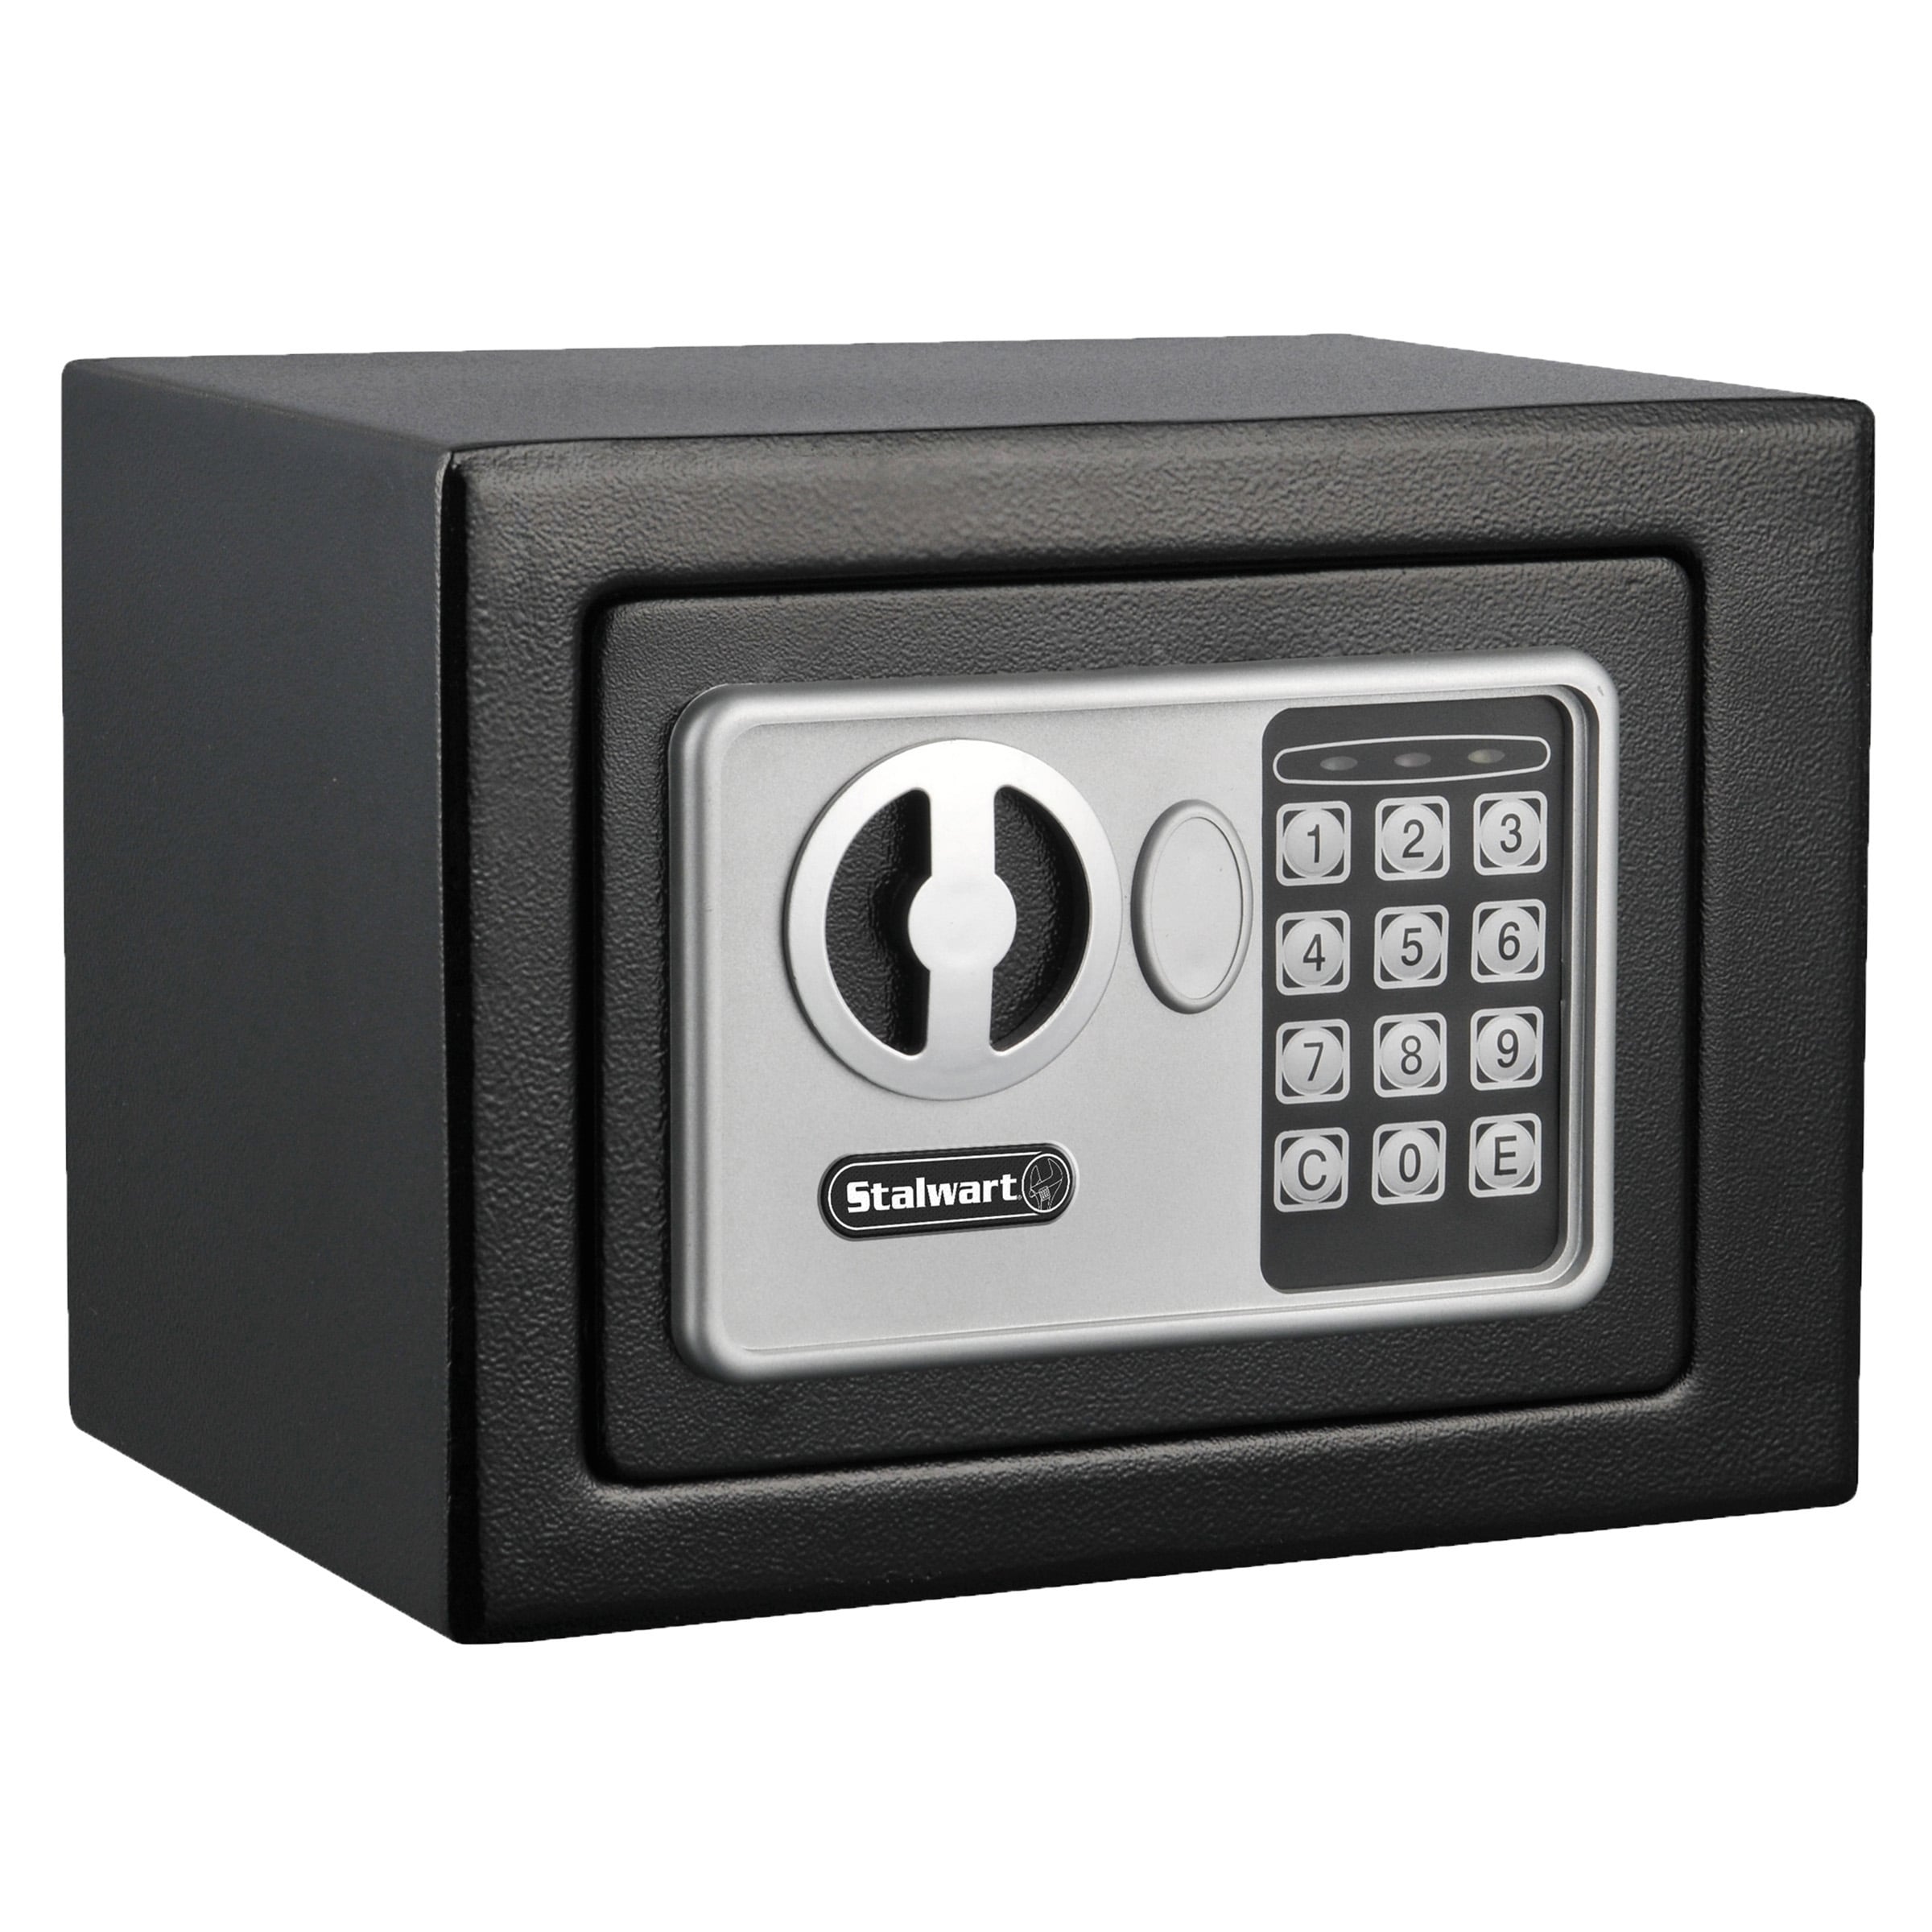 Fleming Supply 0.22-cu ft Wall Safe with Electronic/Keypad Lock in